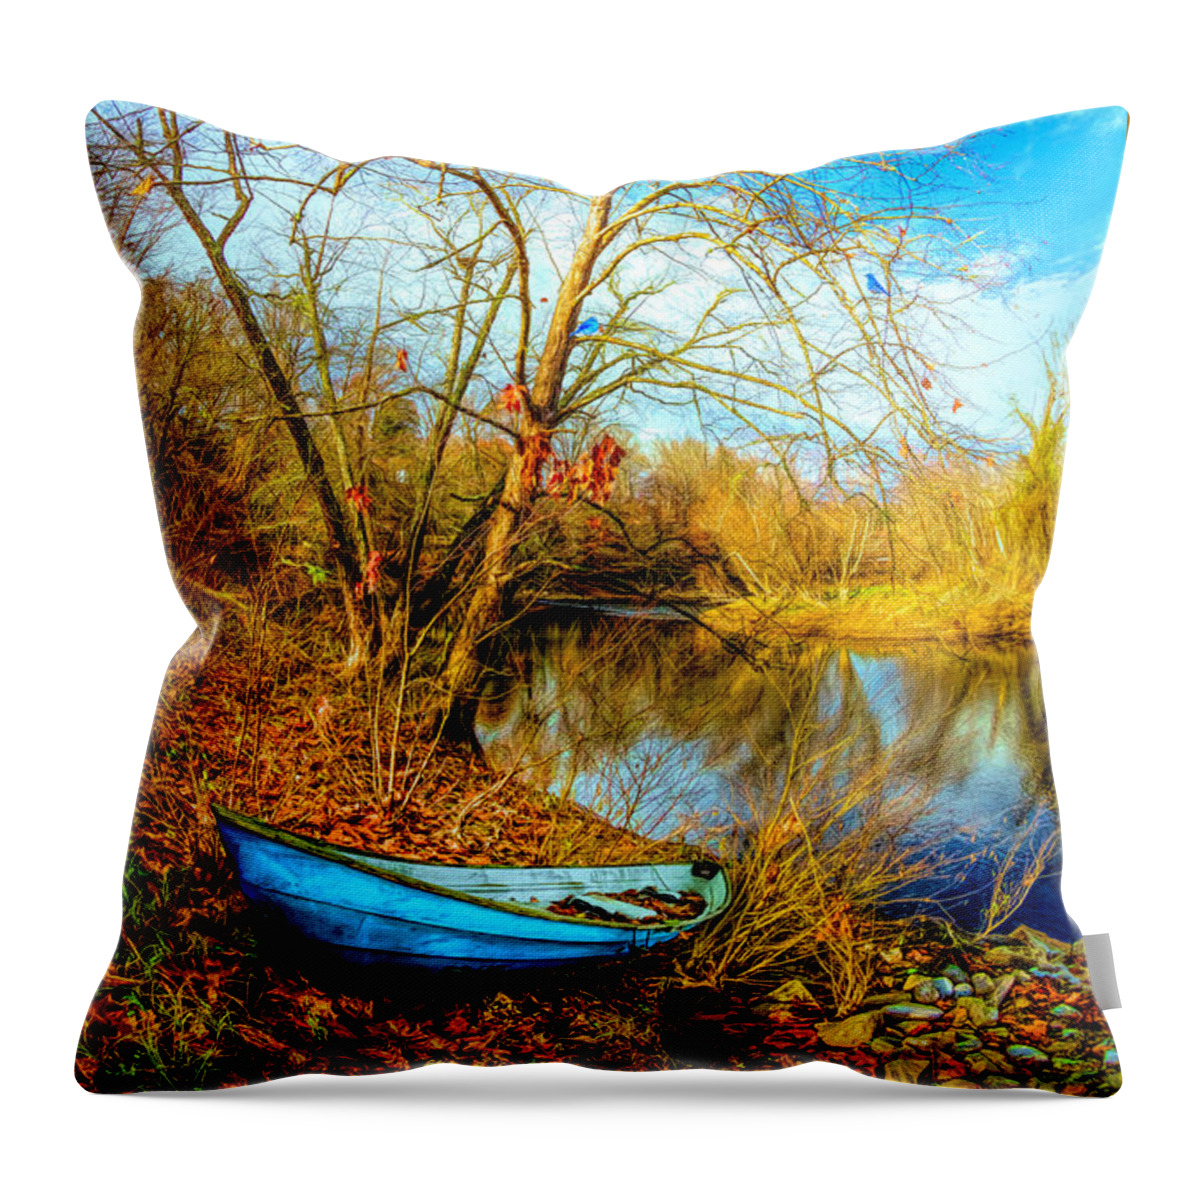 Boats Throw Pillow featuring the photograph Blues at the End of Autumn by Debra and Dave Vanderlaan